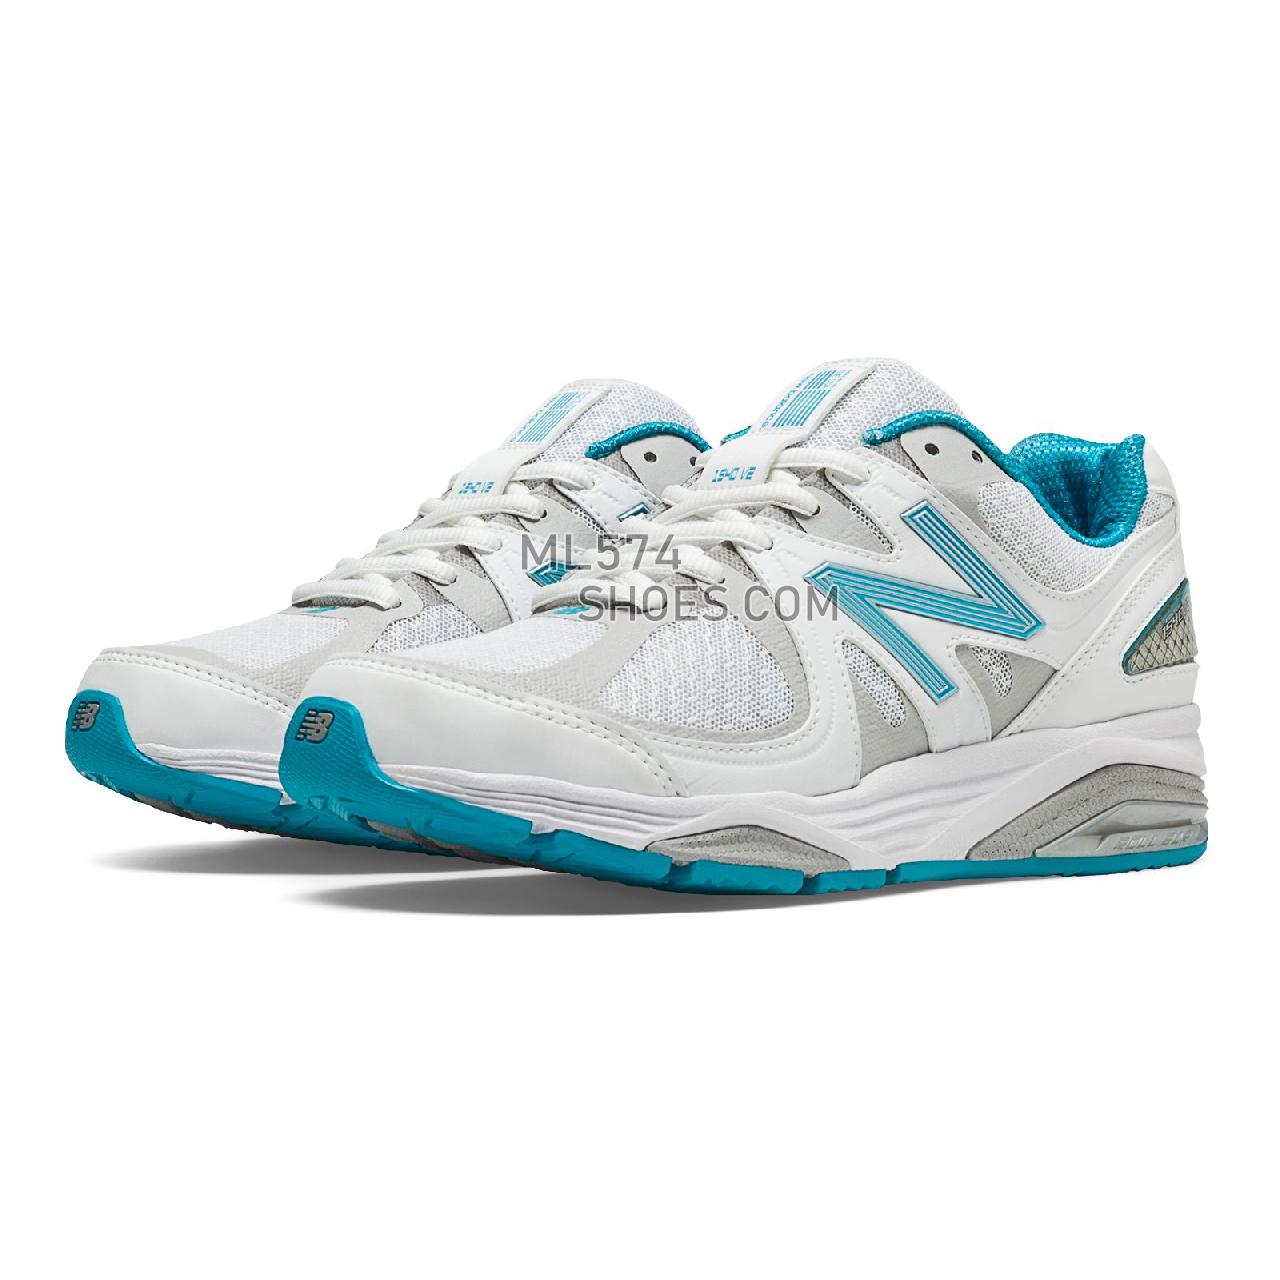 New Balance 1540v2 - Women's 1540 - Running White with Blue Bell - W1540WB2